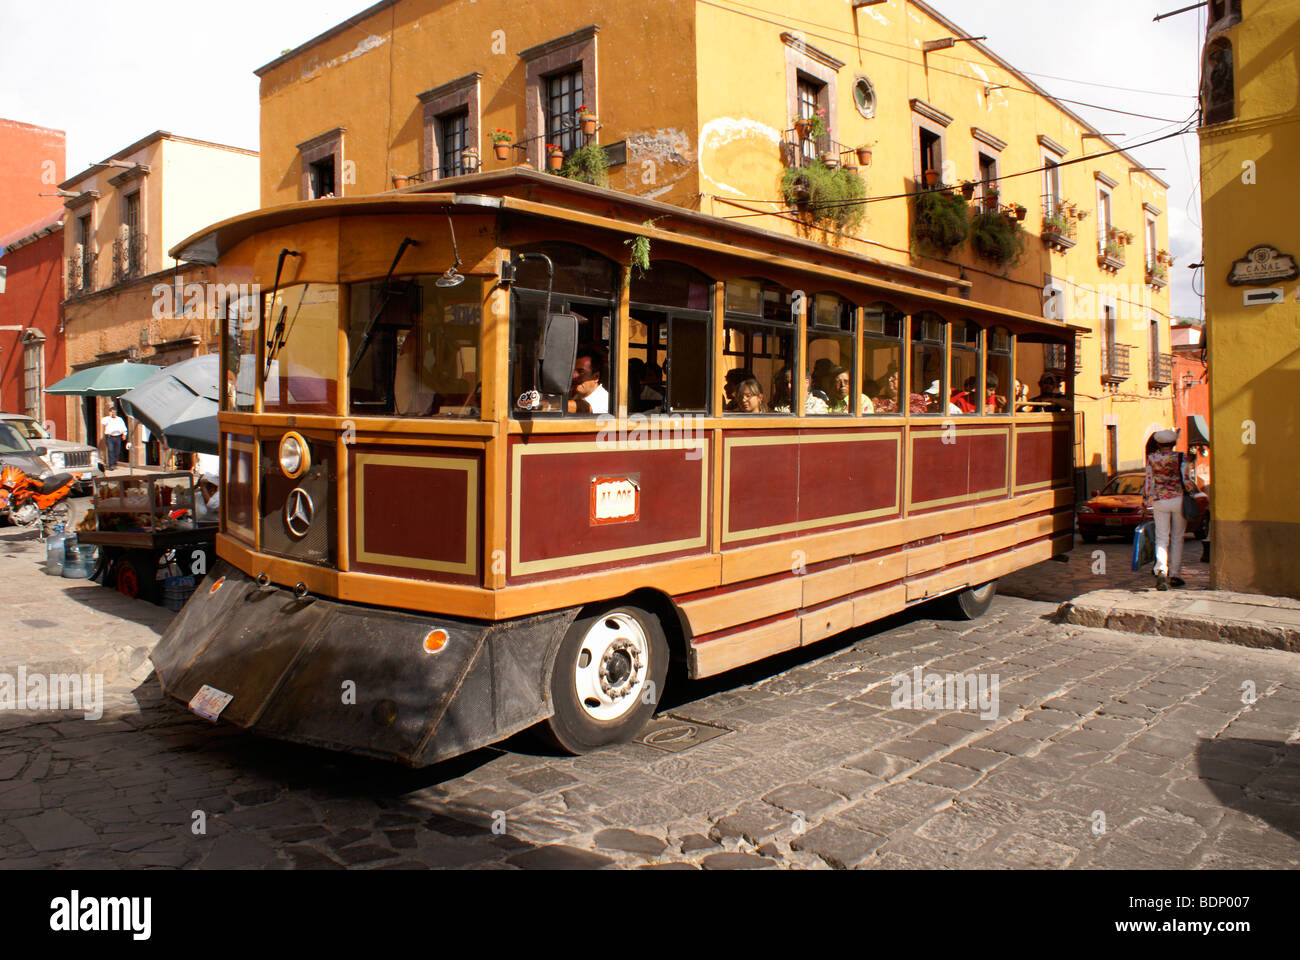 Sightseeing trolley bus on a street in San Miguel de Allende, Guanajuato Mexico Stock Photo